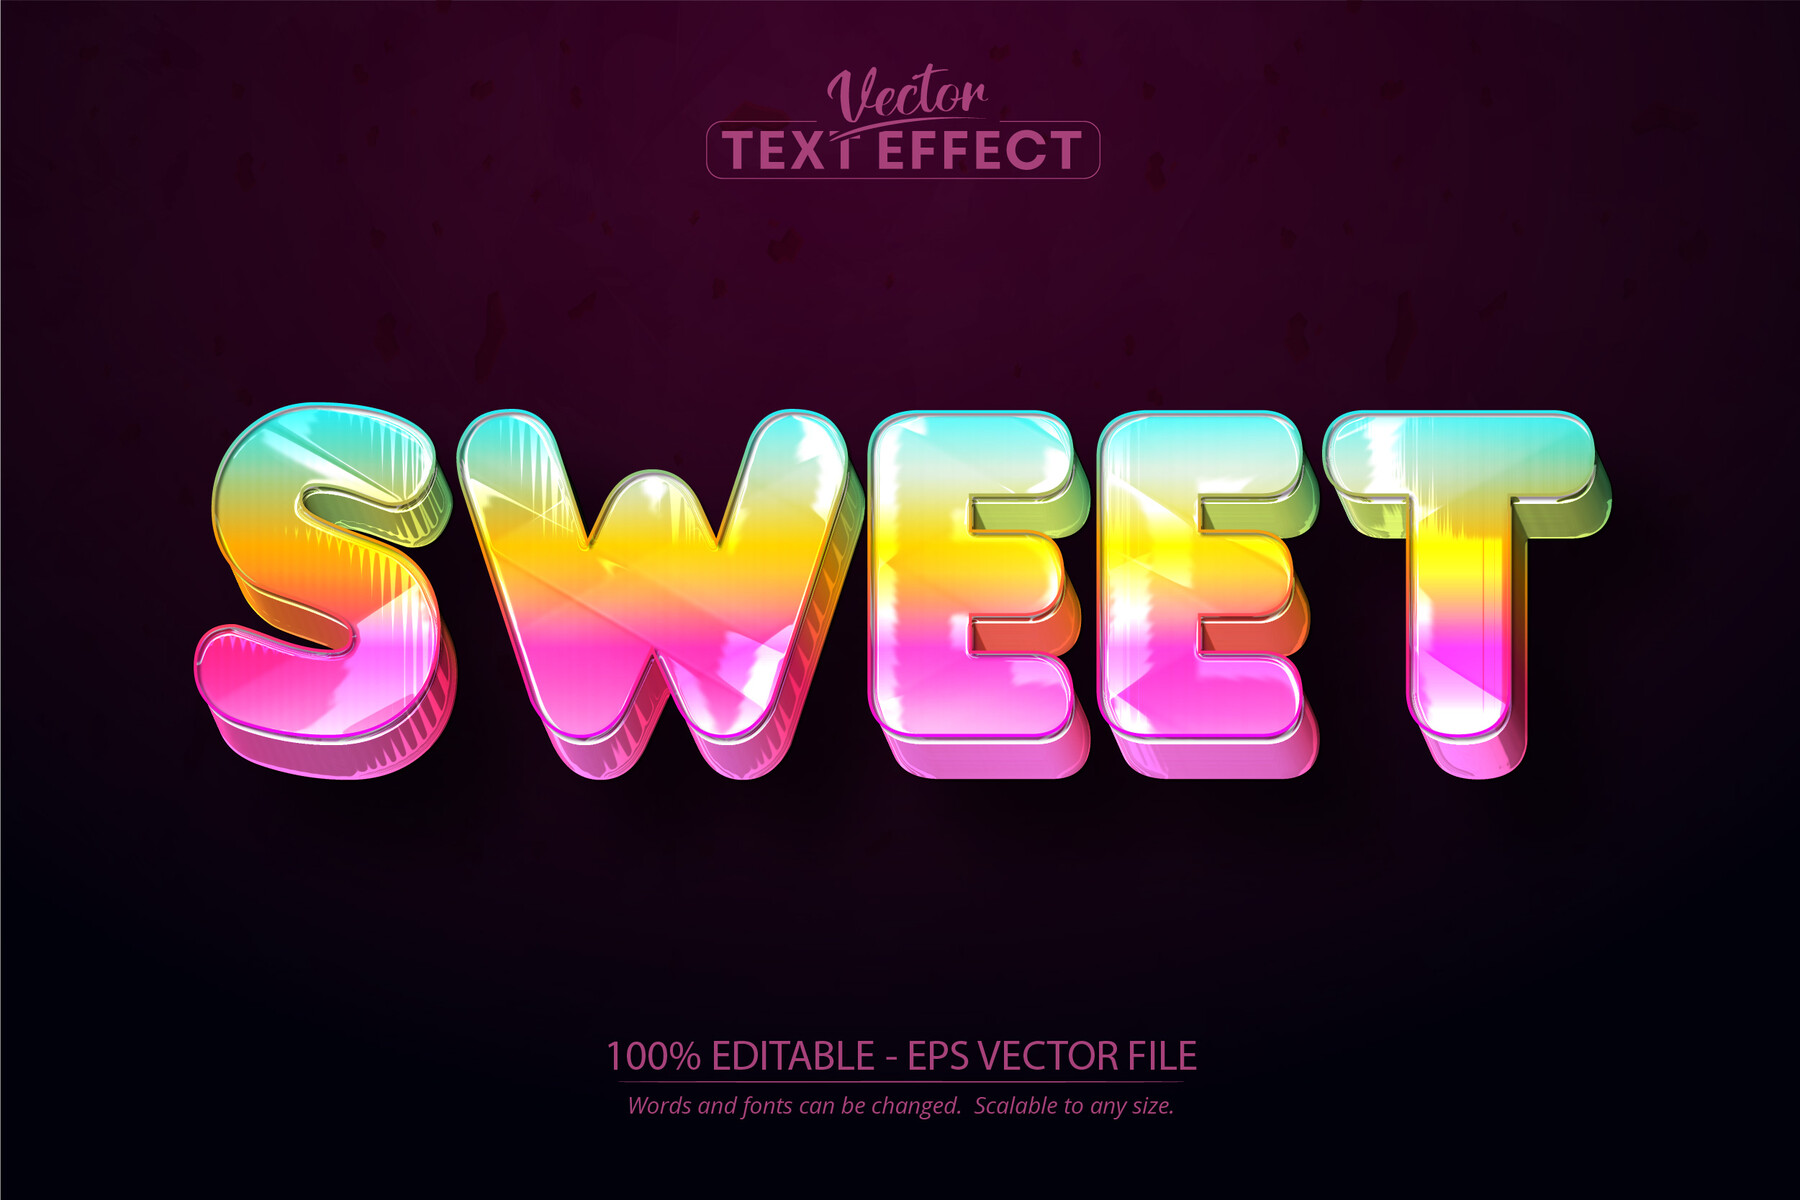 Шрифт в сладком стиле. Candy text. Pink Candy text Effect. Ahliy Candy text.